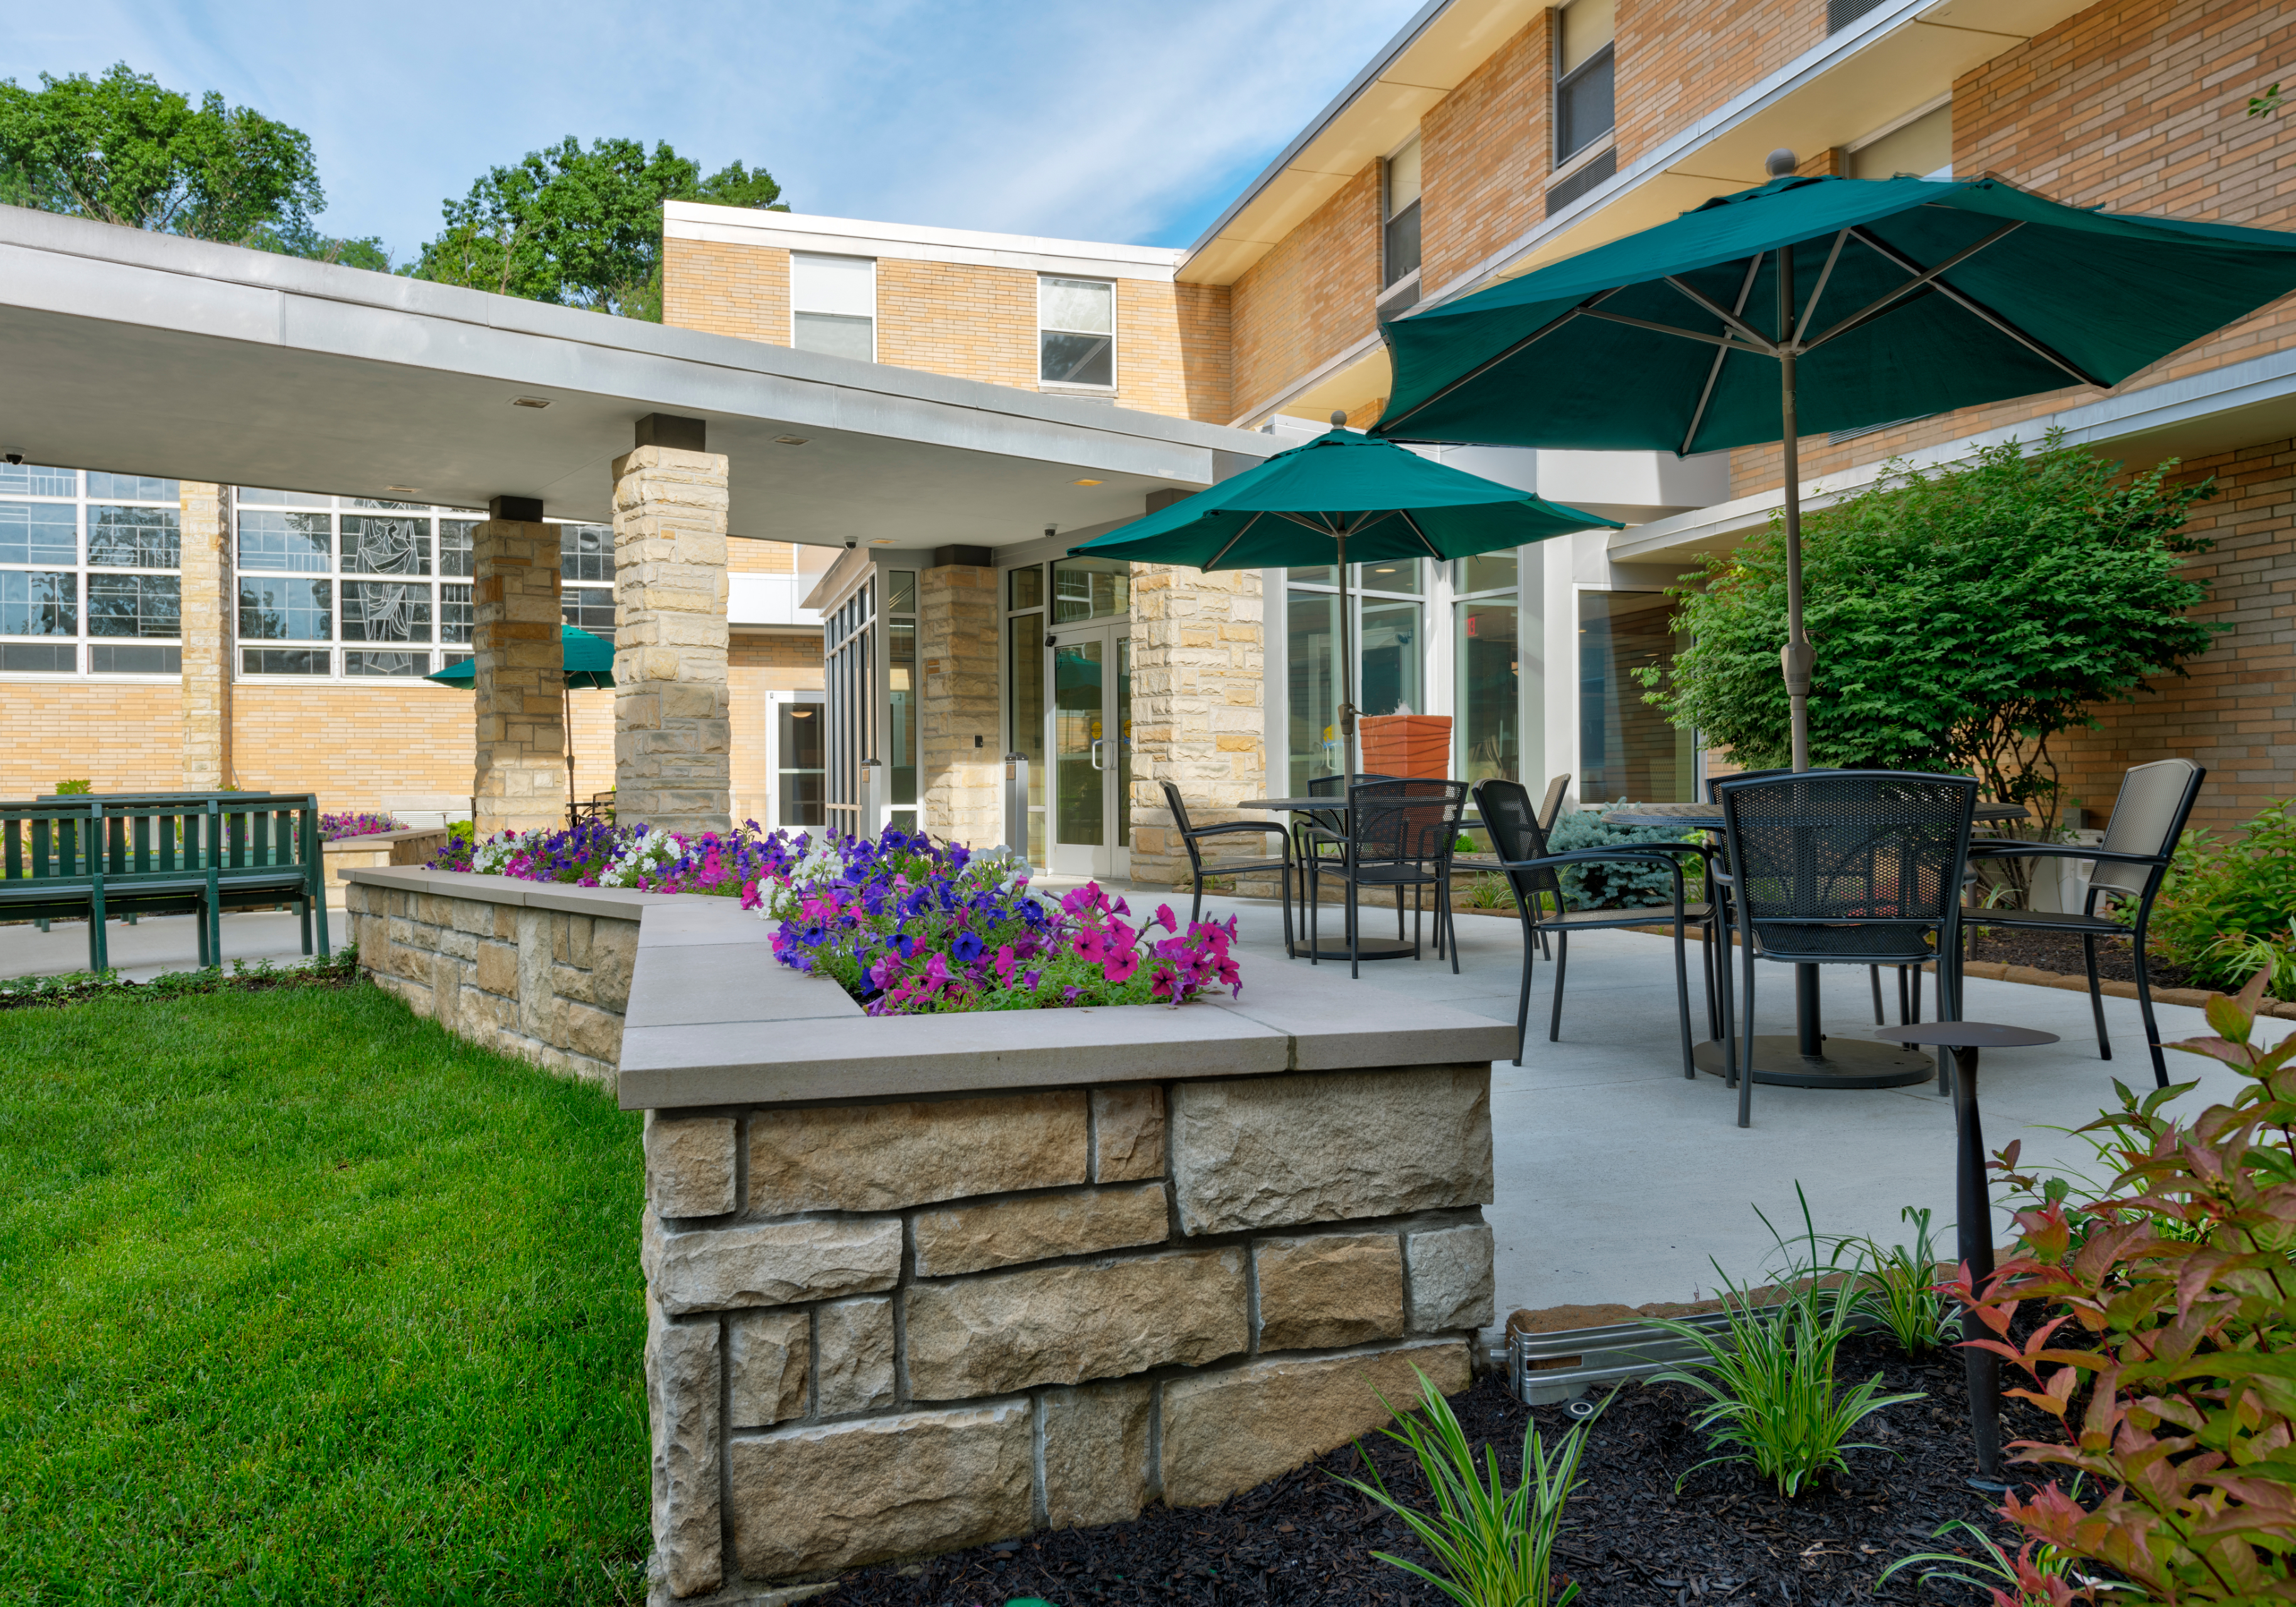 Our senior living community at St. Margaret Hall is full of activity and engagement.